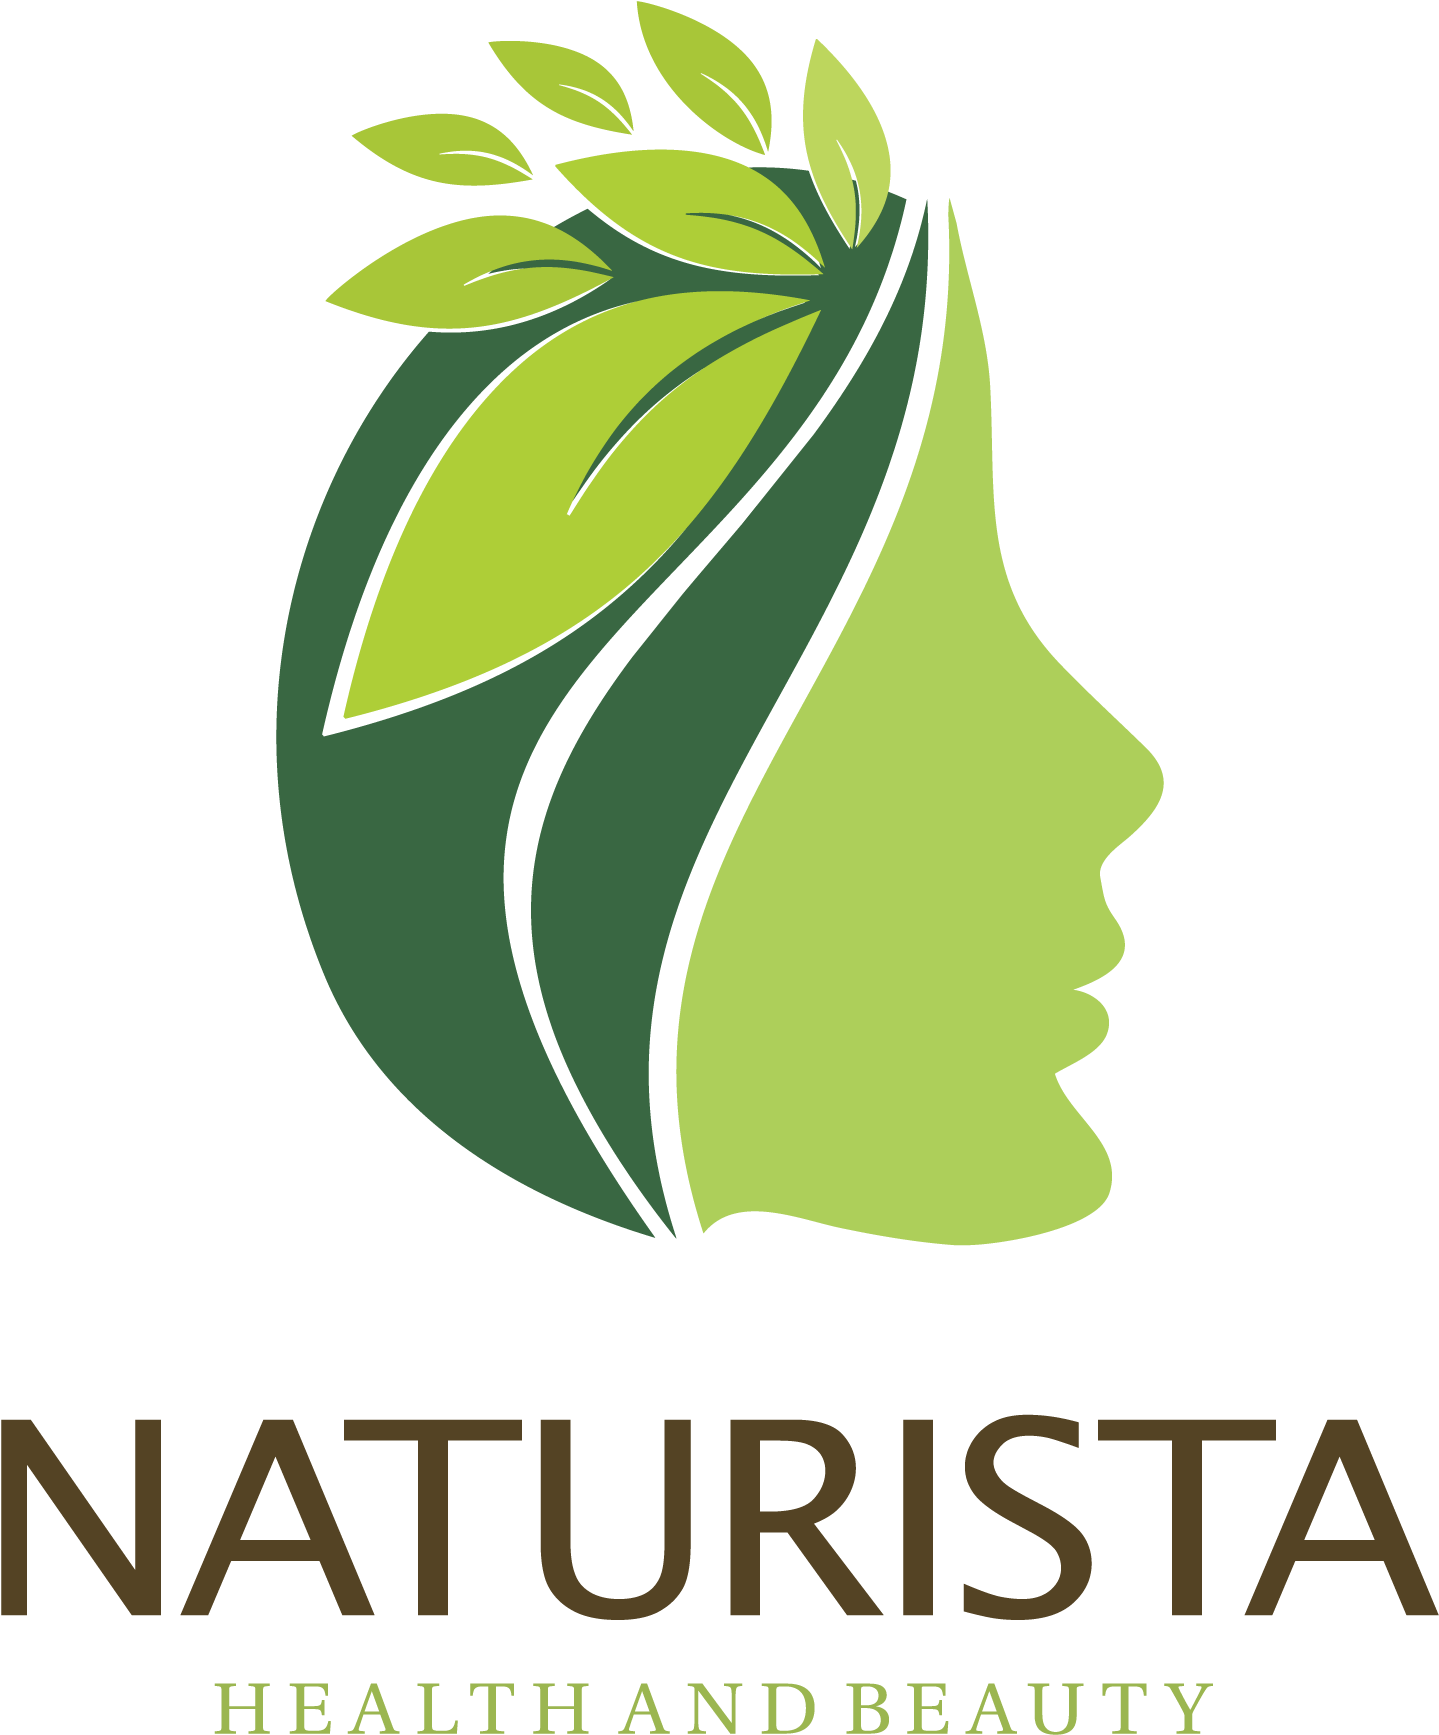 Beauty Portrait Of Nature Woman With Green Leaves Hair - Naturista (2000x2000)